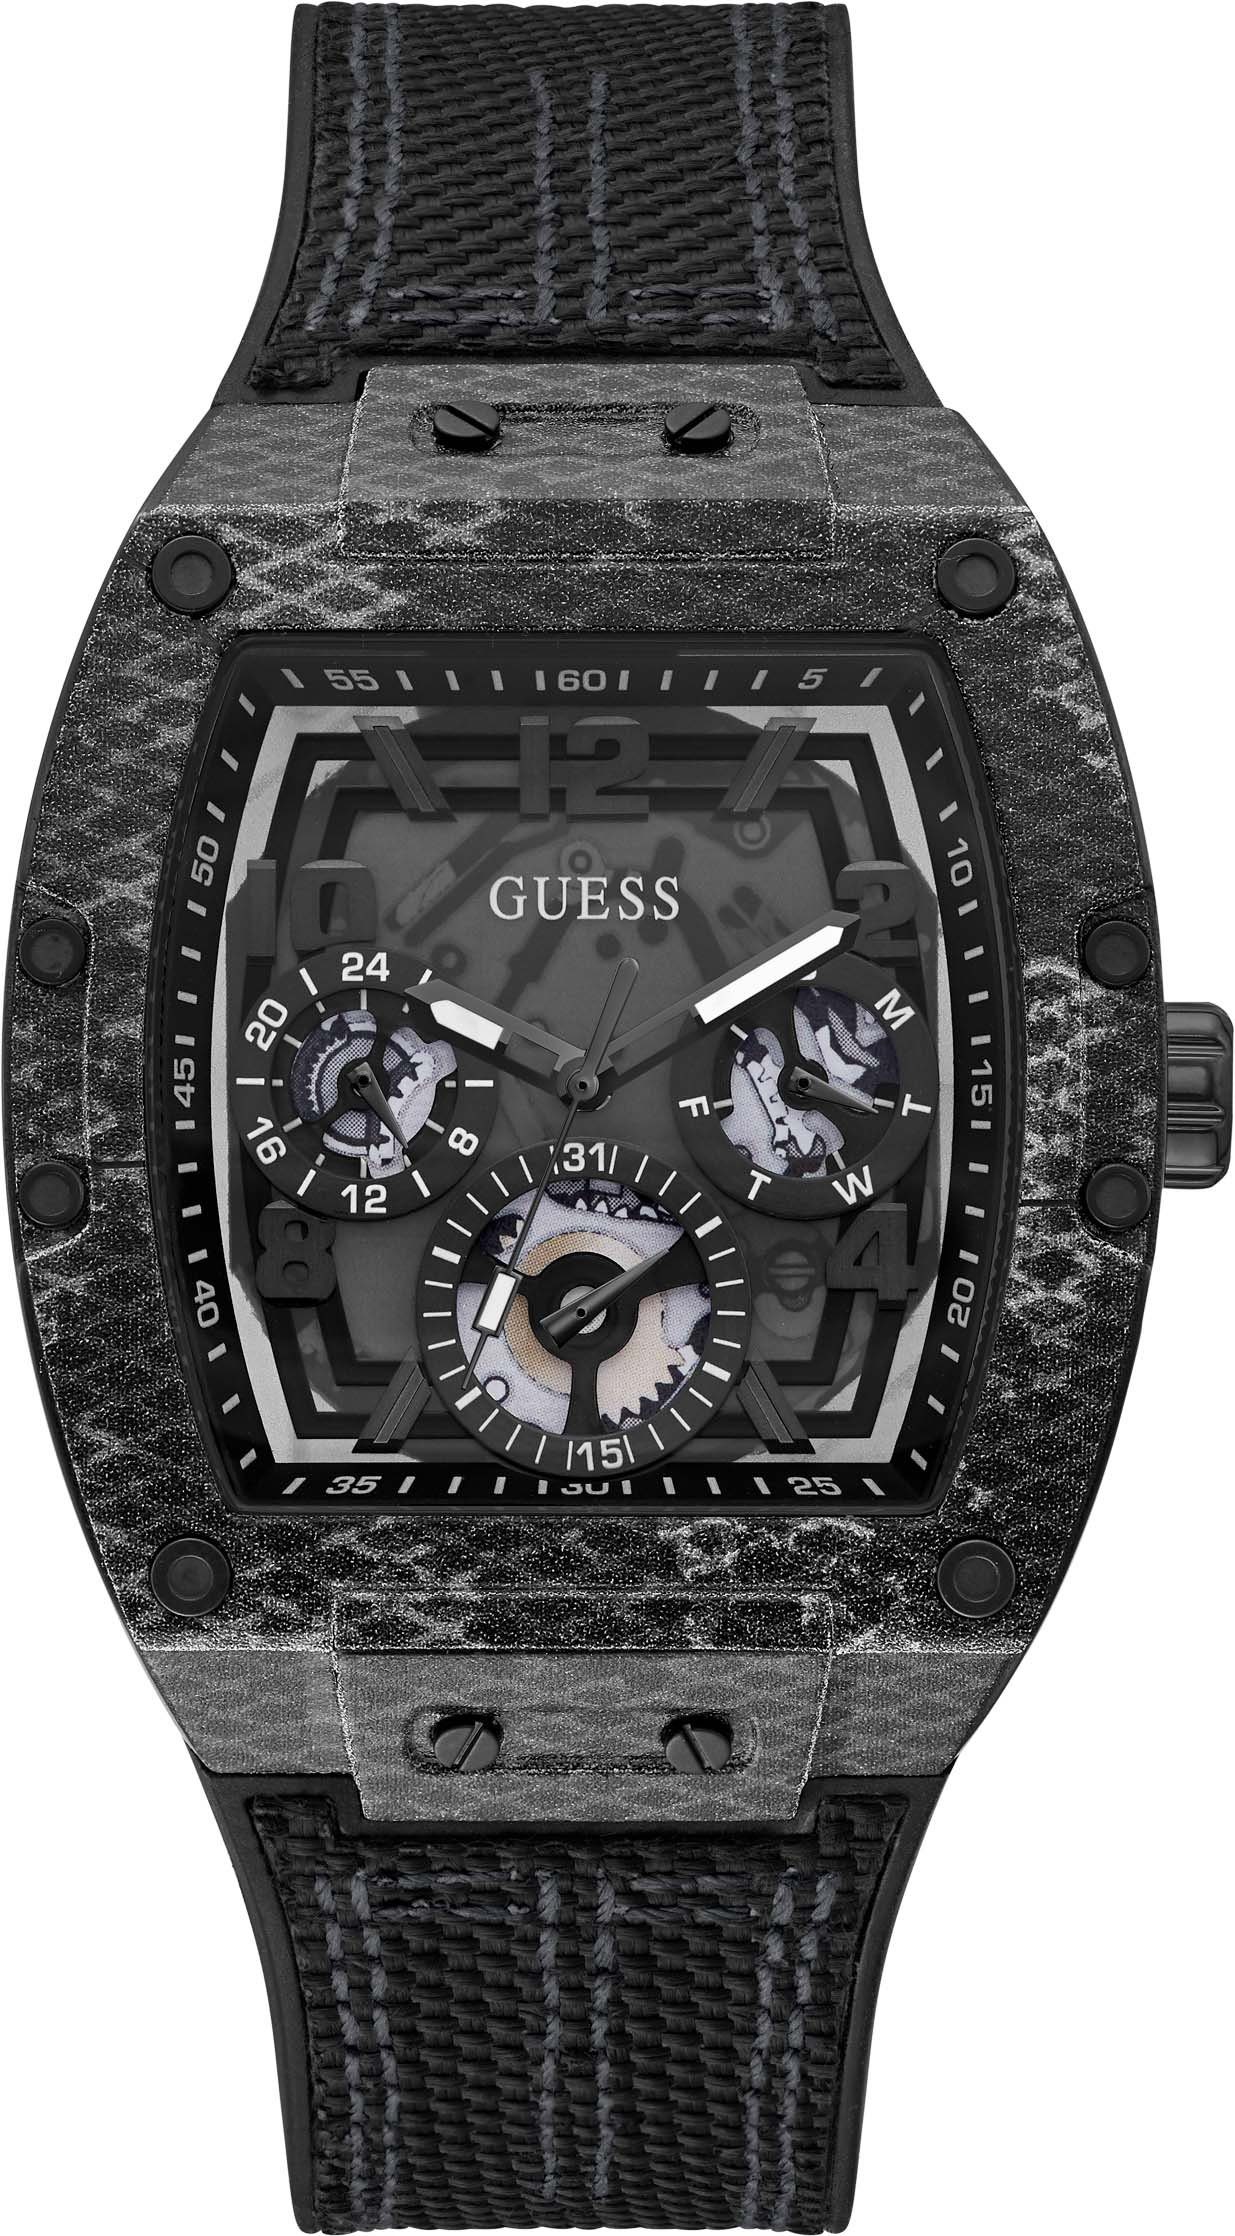 Multifunktionsuhr Guess GW0422G2